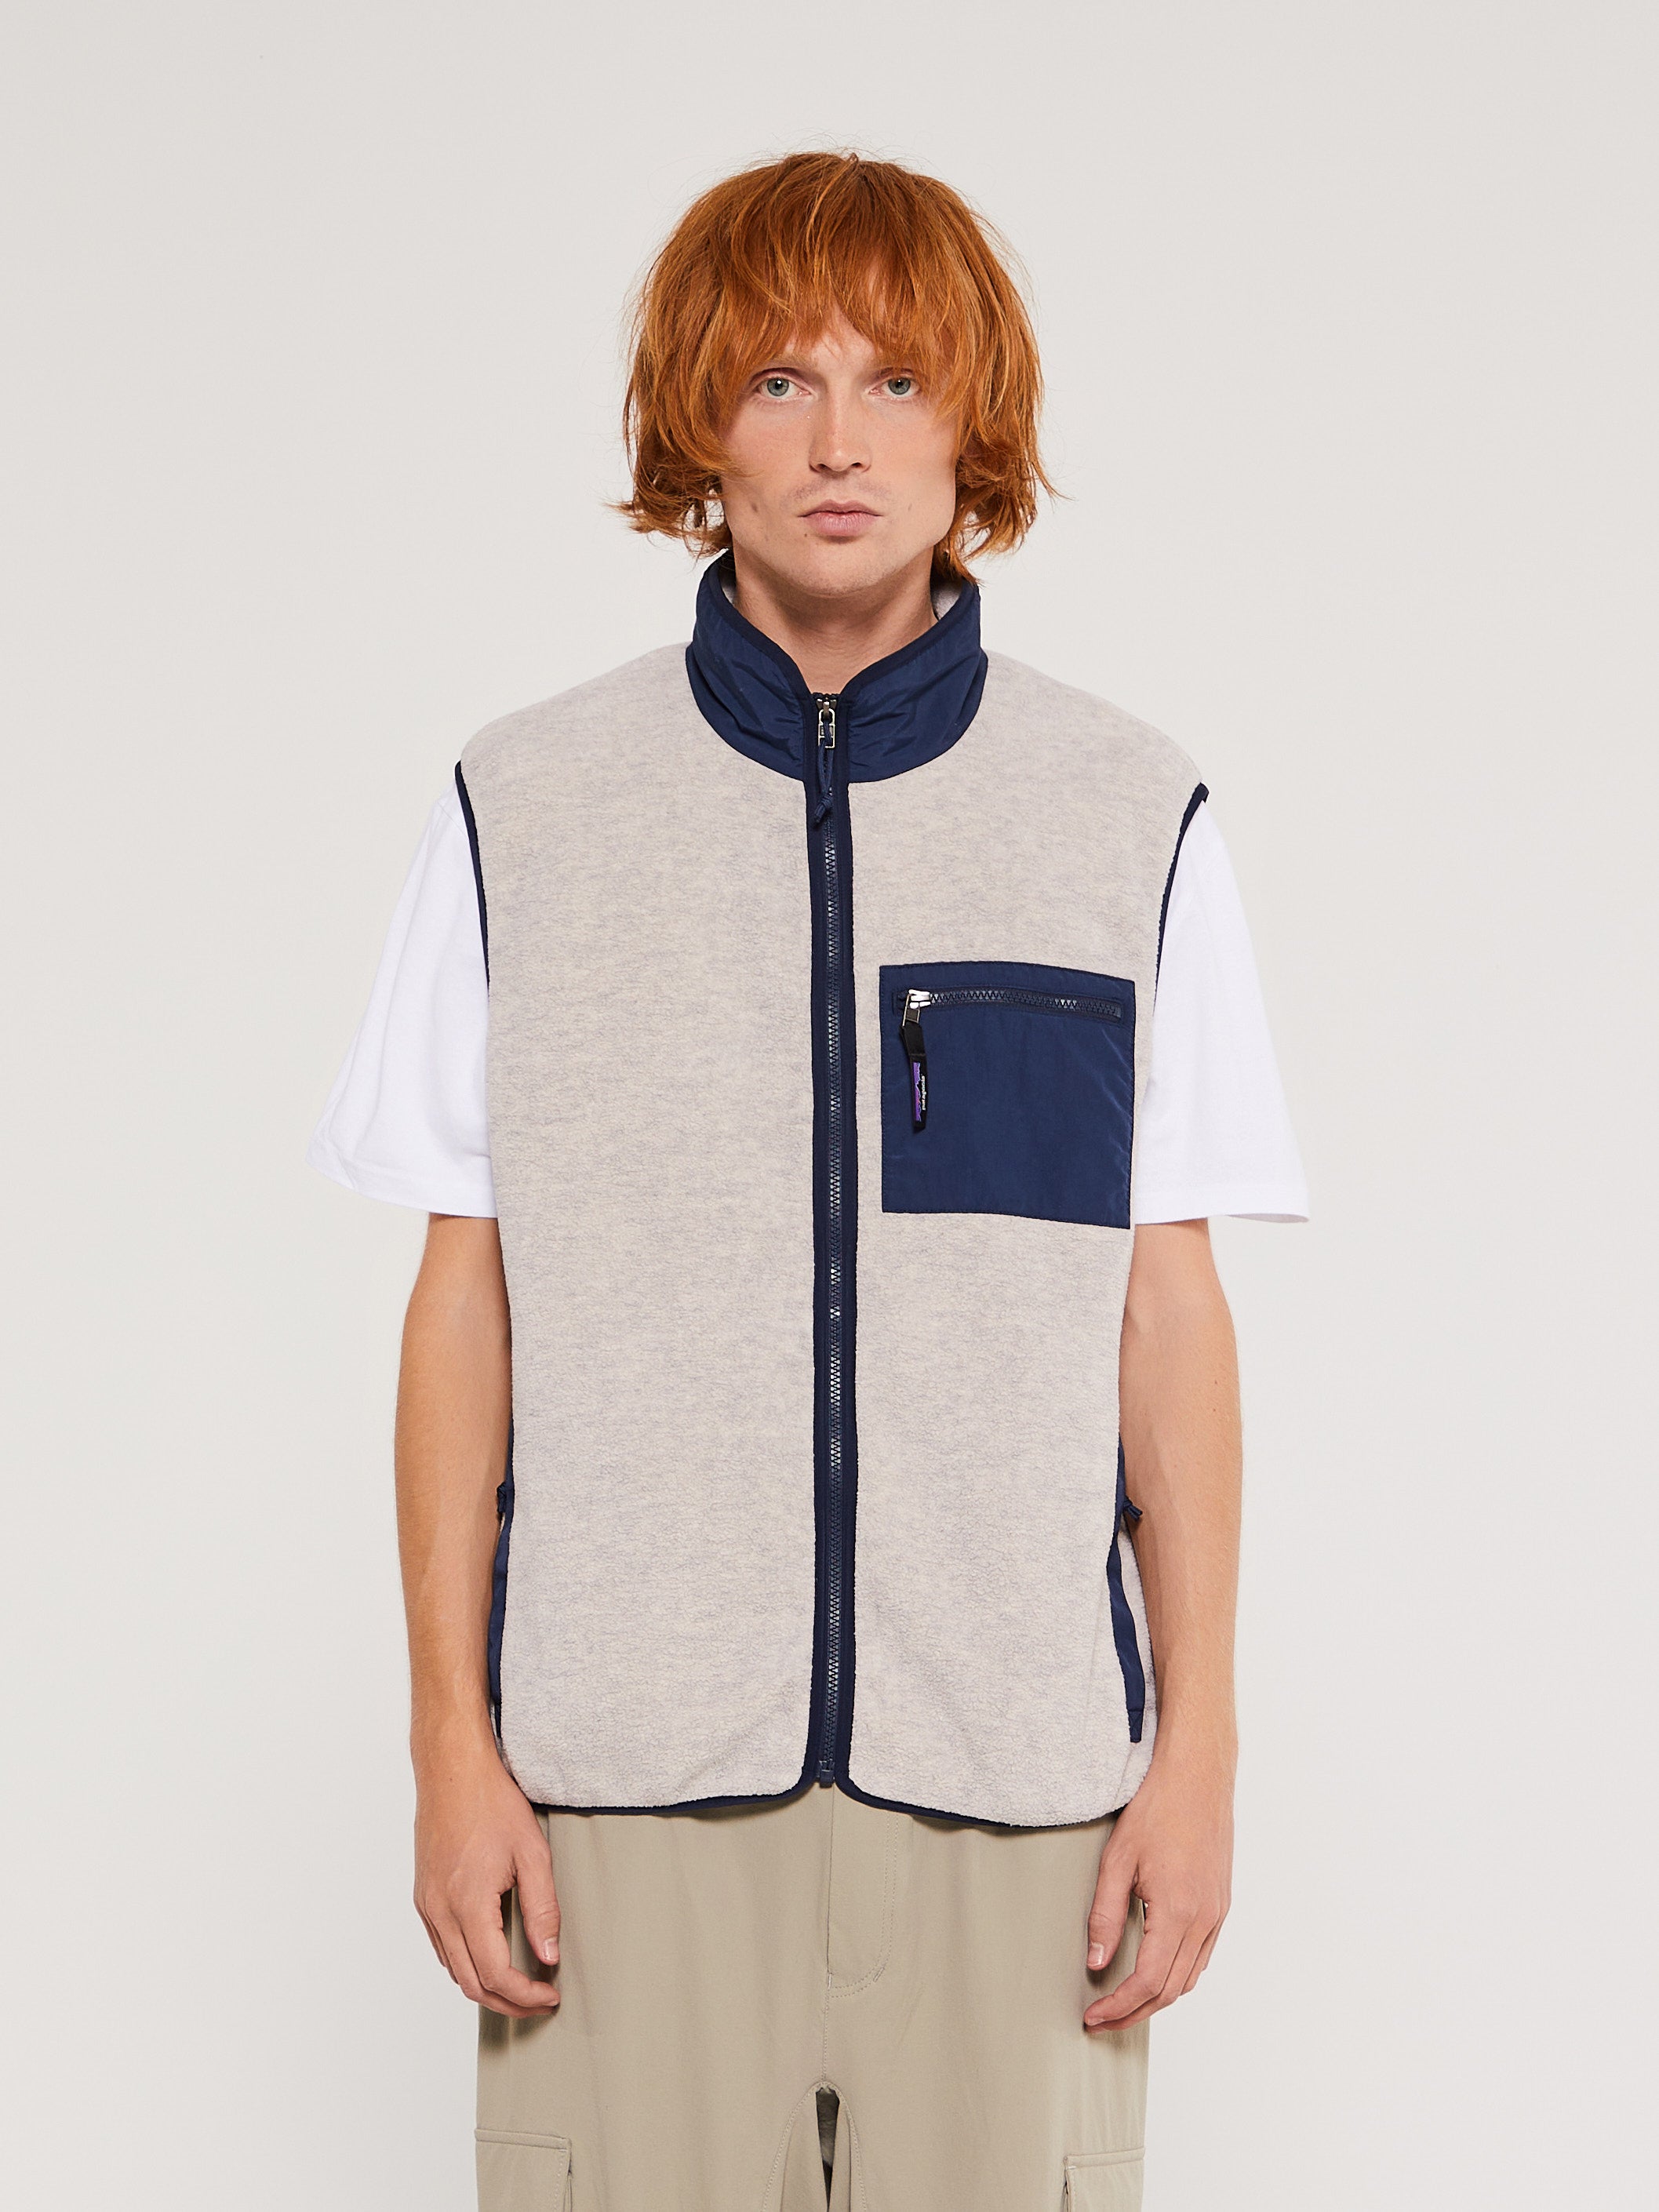 PATAGONIA - Synch Vest in Oatmeal Heather